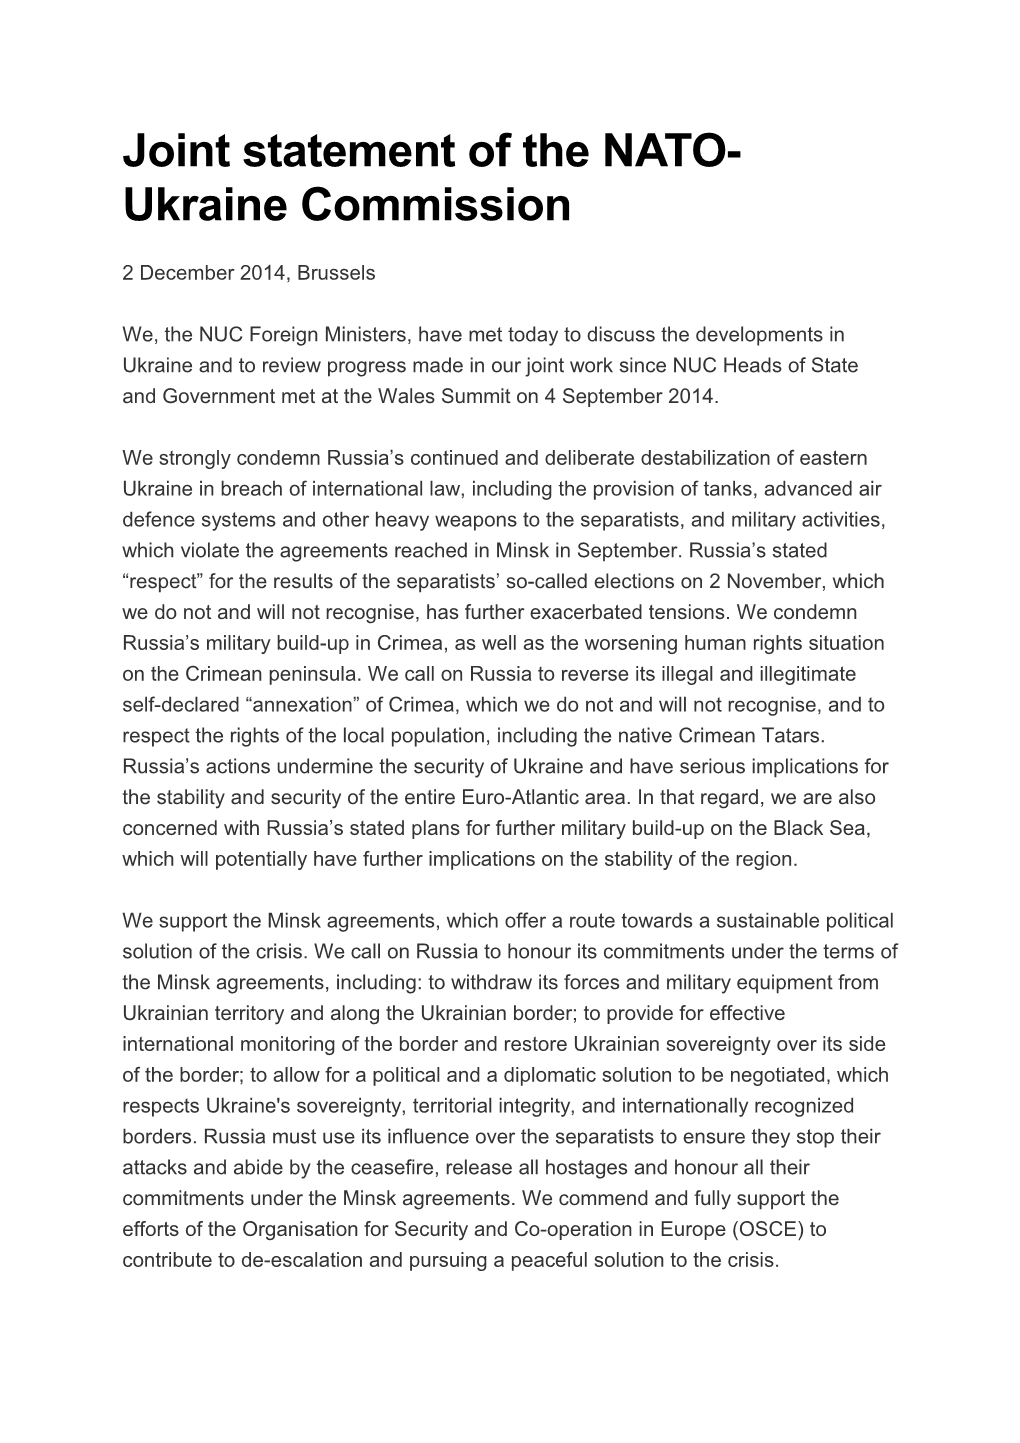 Joint Statement of the NATO-Ukraine Commission